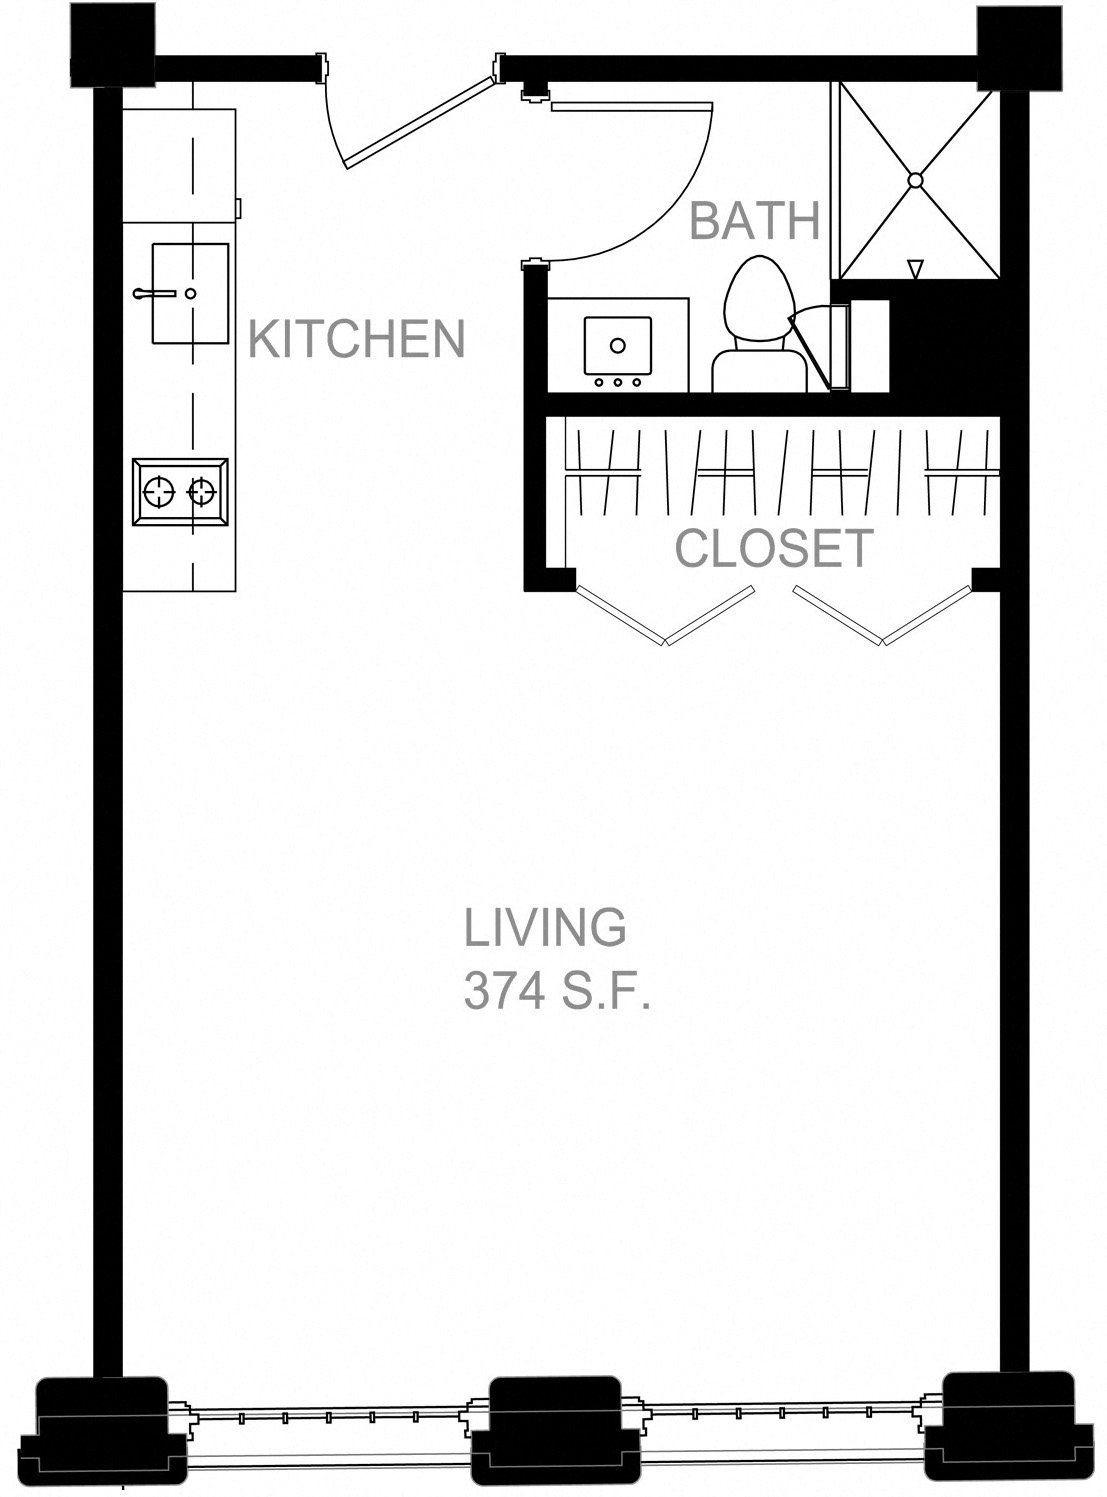 Floorplan for Apartment #S2231, 0 bedroom unit at Halstead Providence